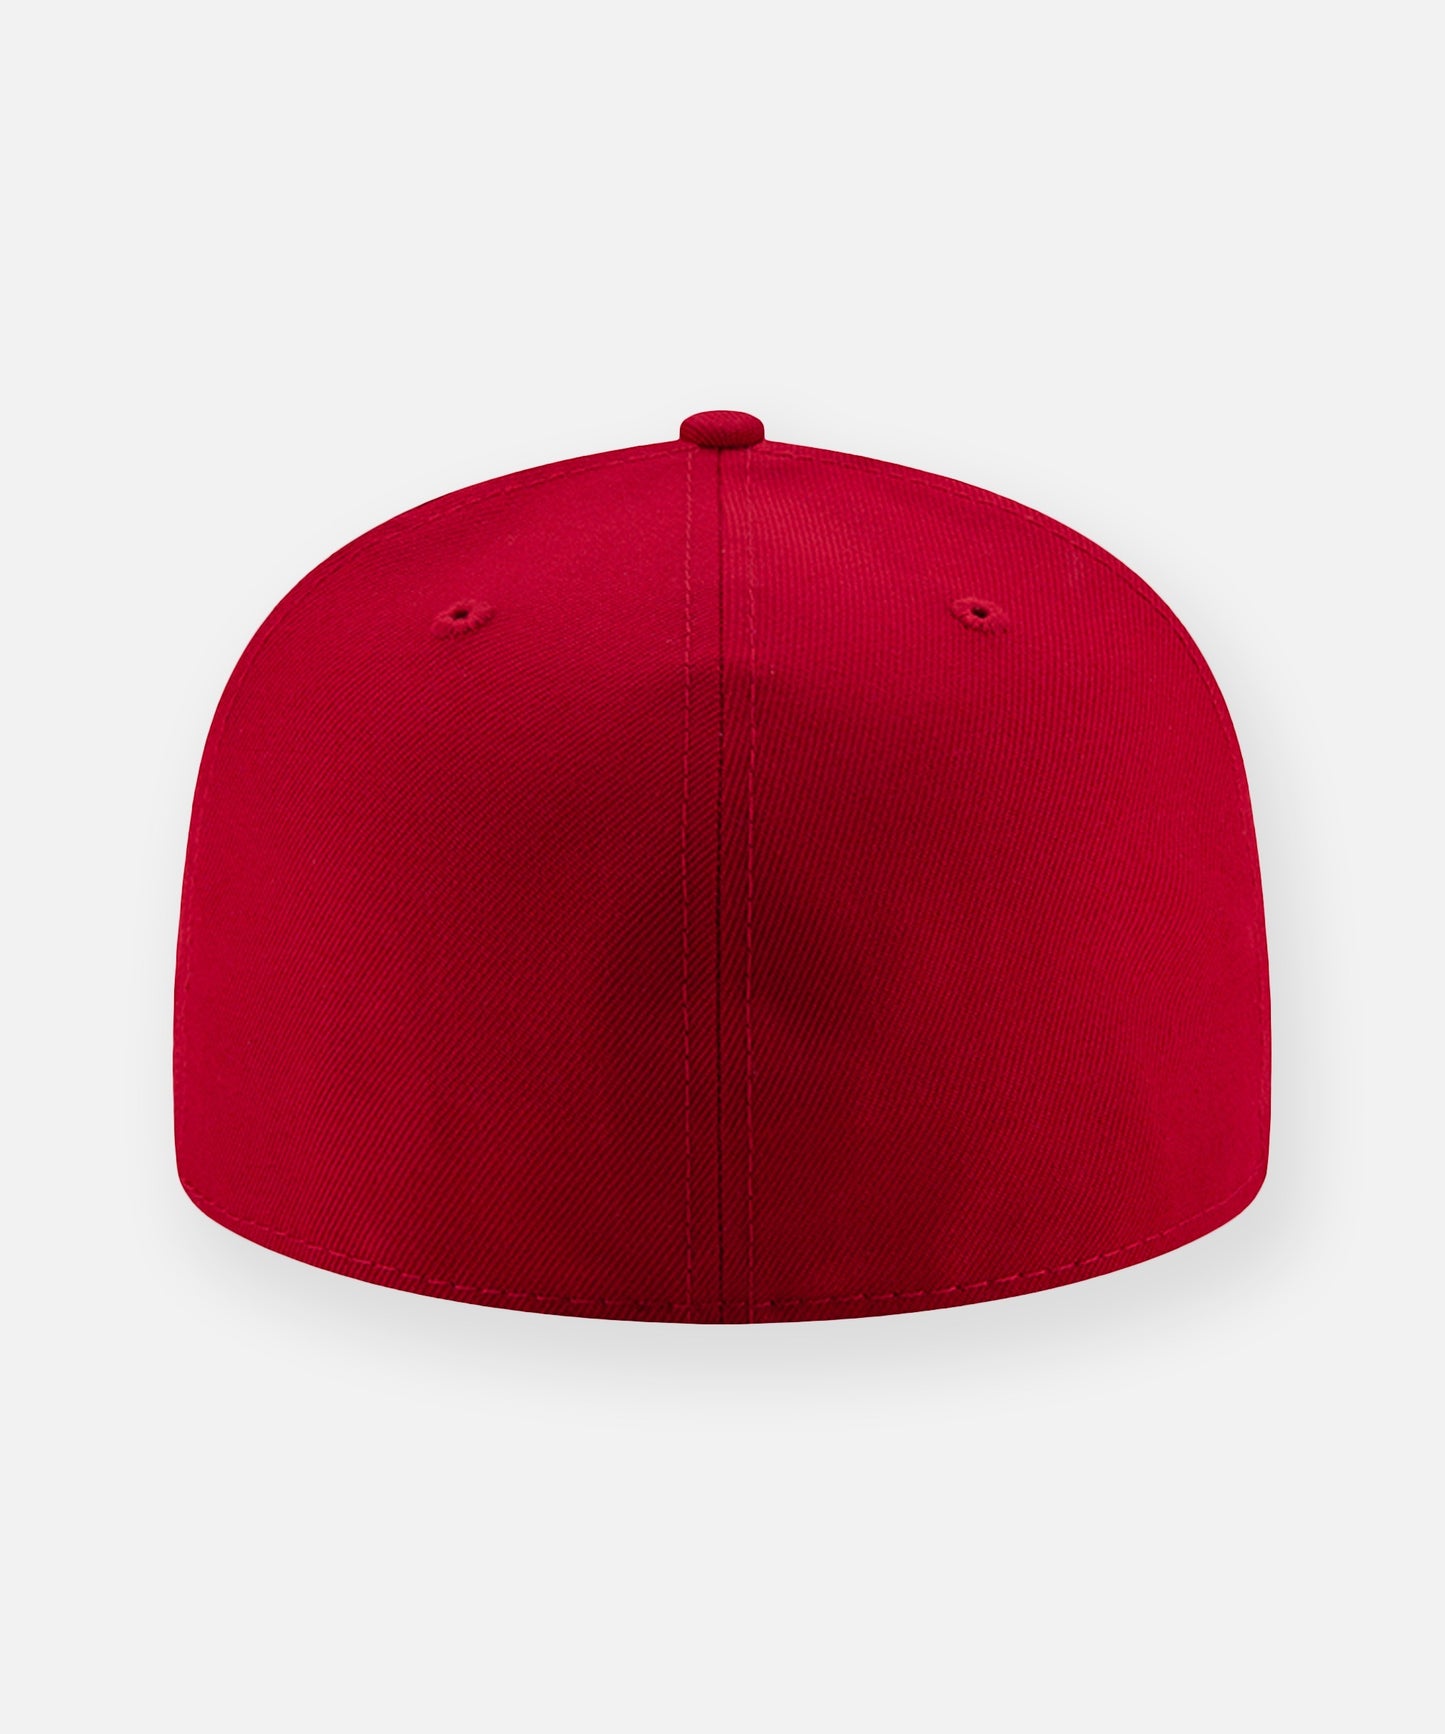 Paper Planes - Crimson Crown Fitted Hat with Grey Undervisor